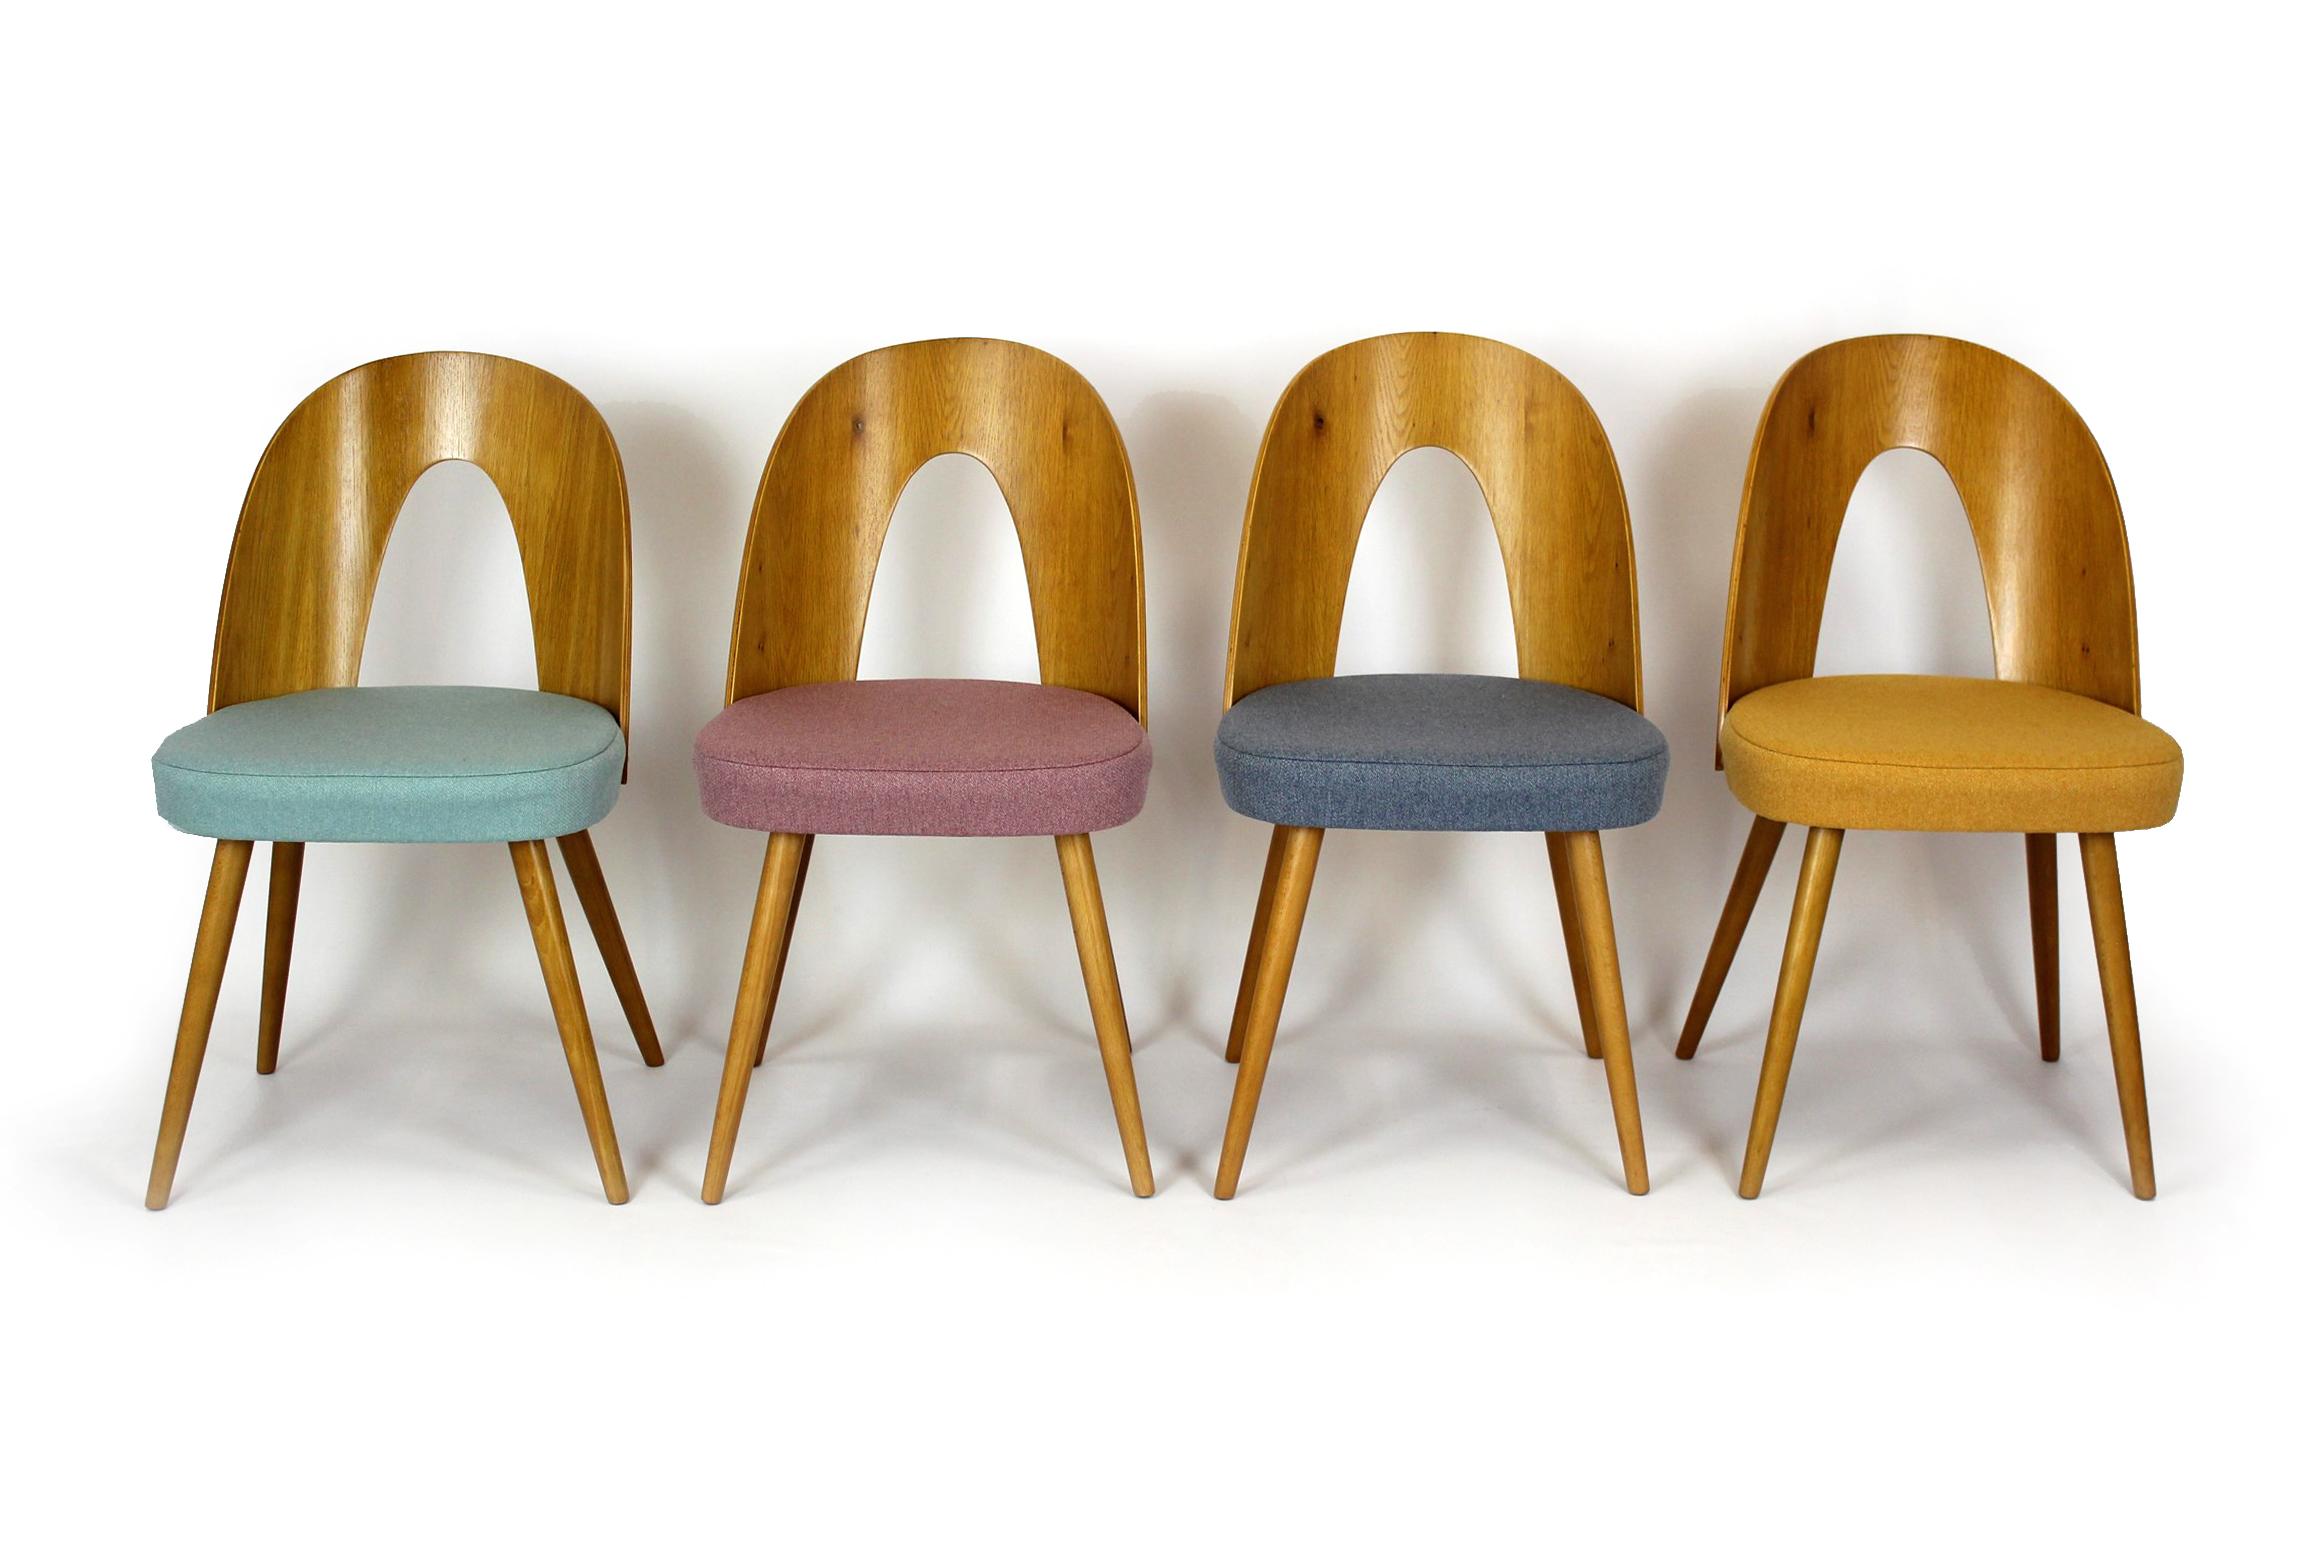 A set of eight chairs, designed in the 1960s by Antonin Suman. The chairs are made of beech wood, the backrests are bent plywood with oak veneer.
The chairs have been completely restored - have new seat foam upholstered with a fabric with increased